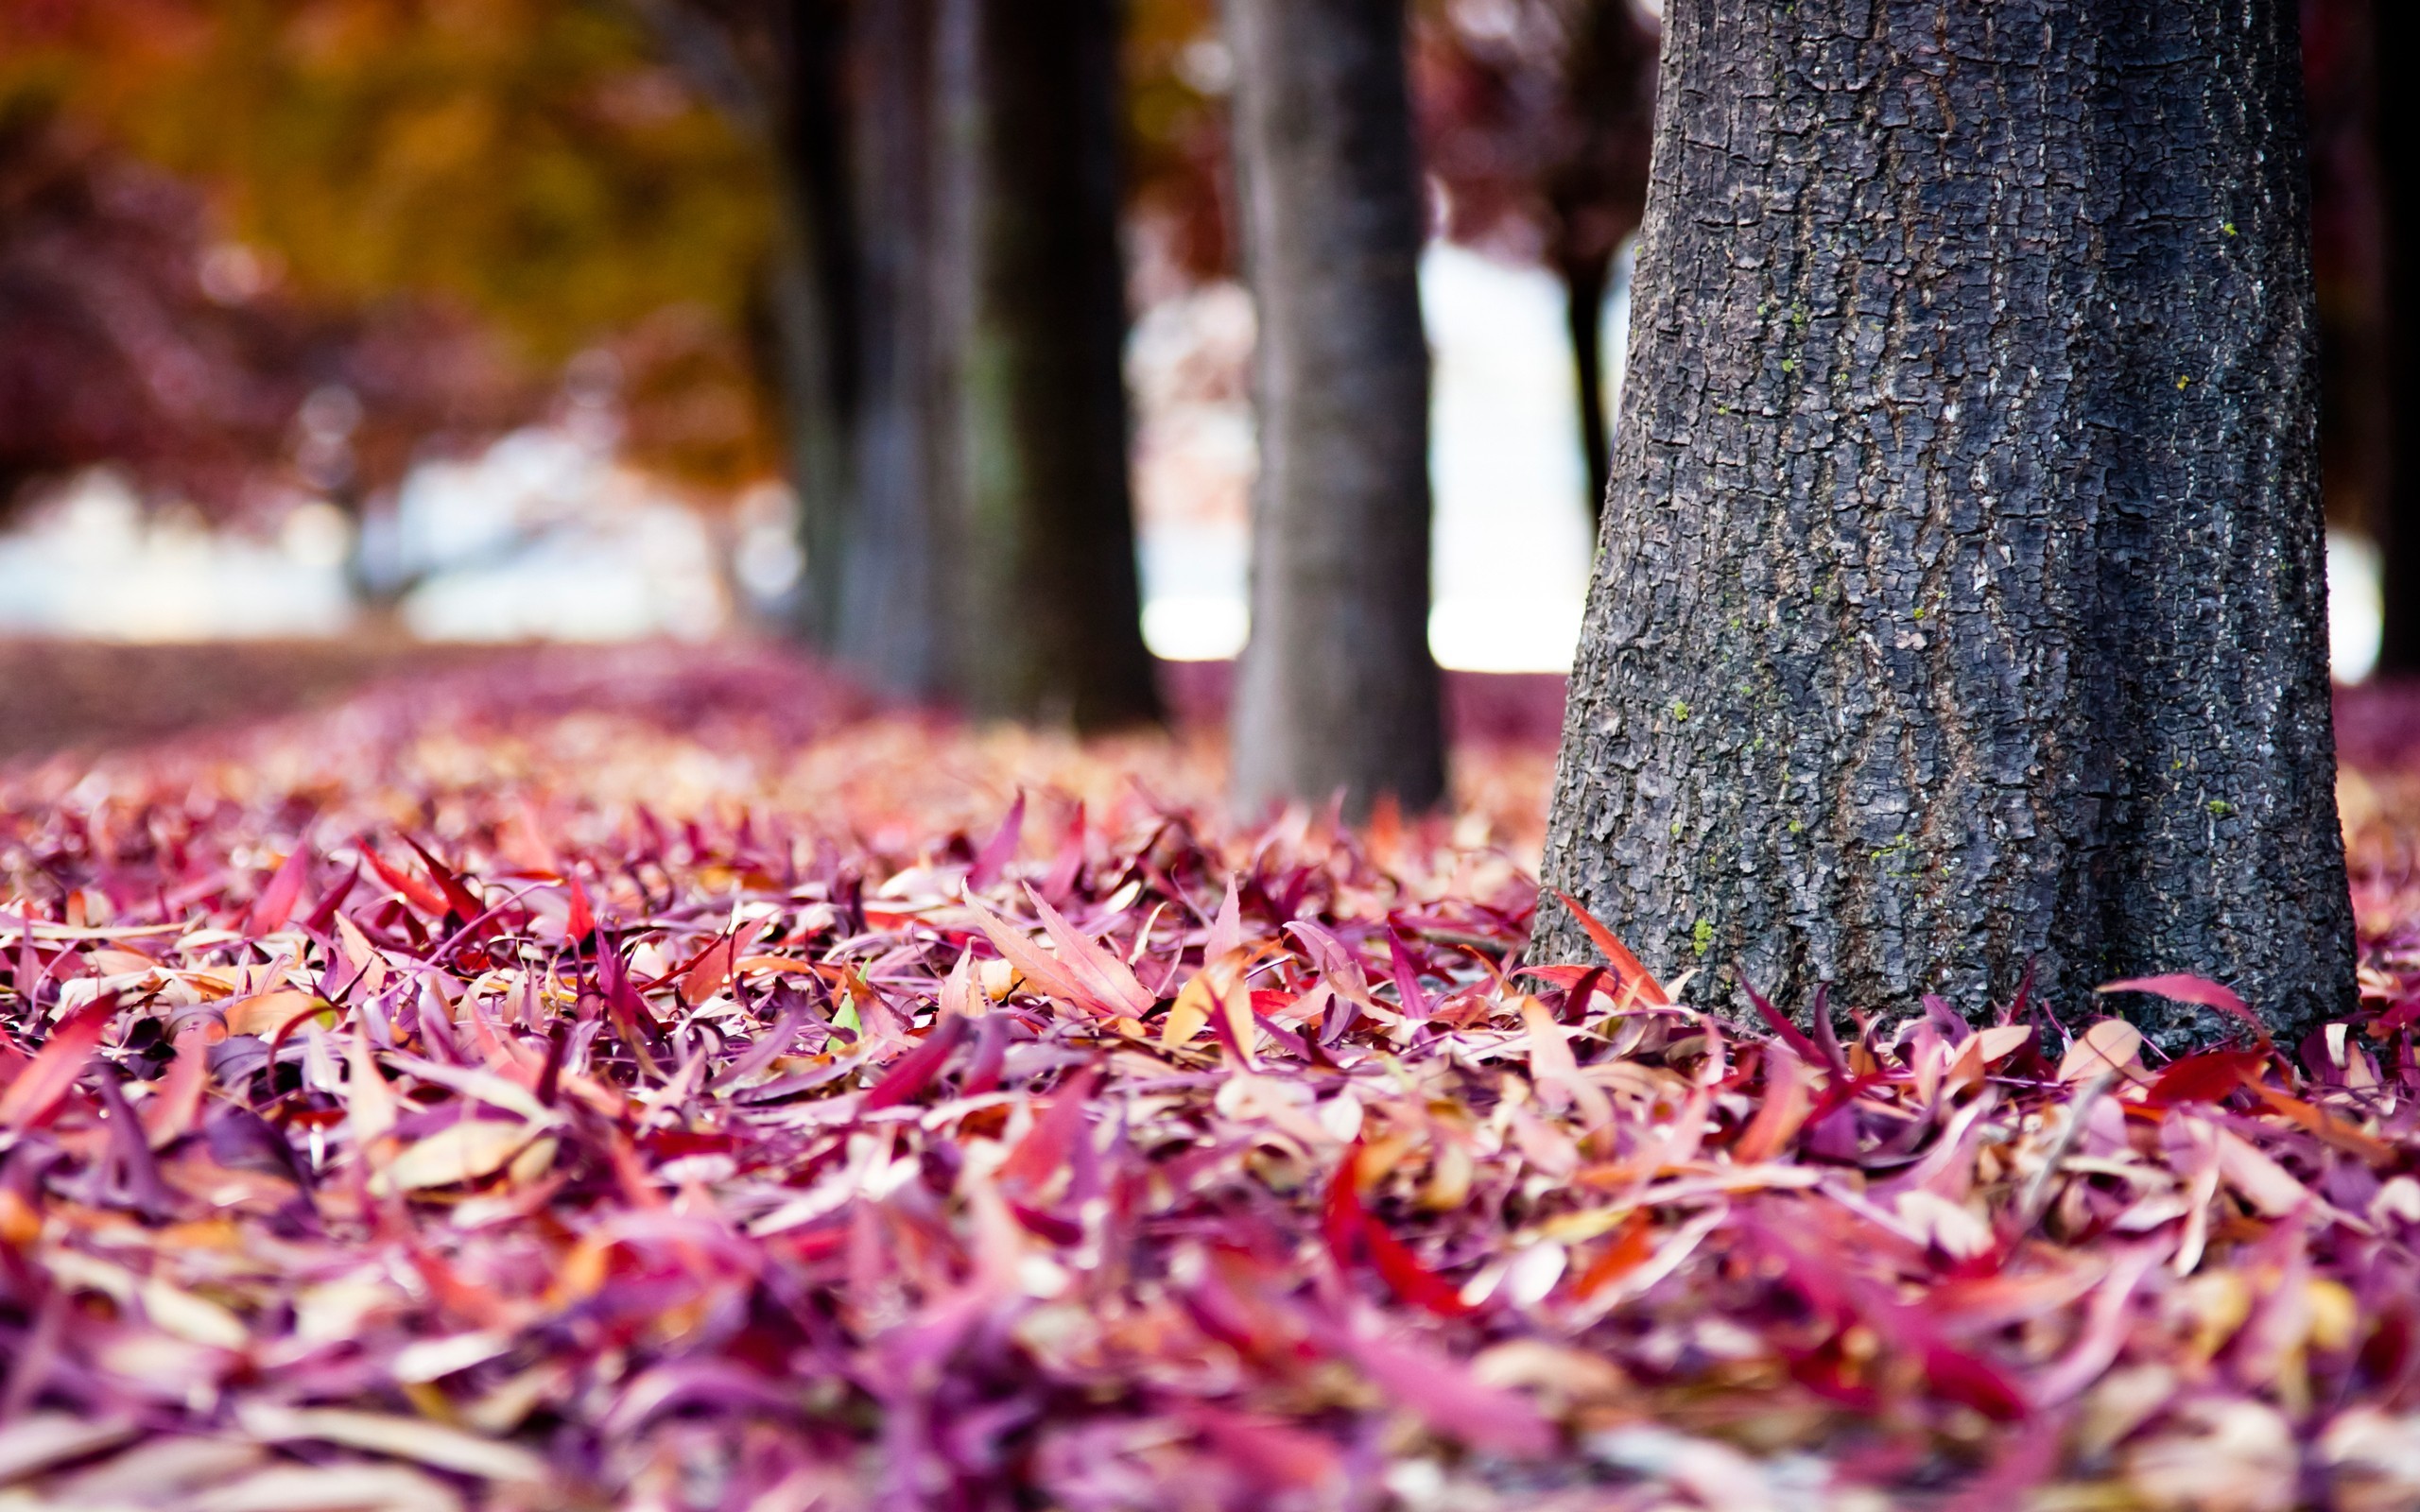 General 2560x1600 leaves red leaves nature fall tree trunk fallen leaves outdoors trees